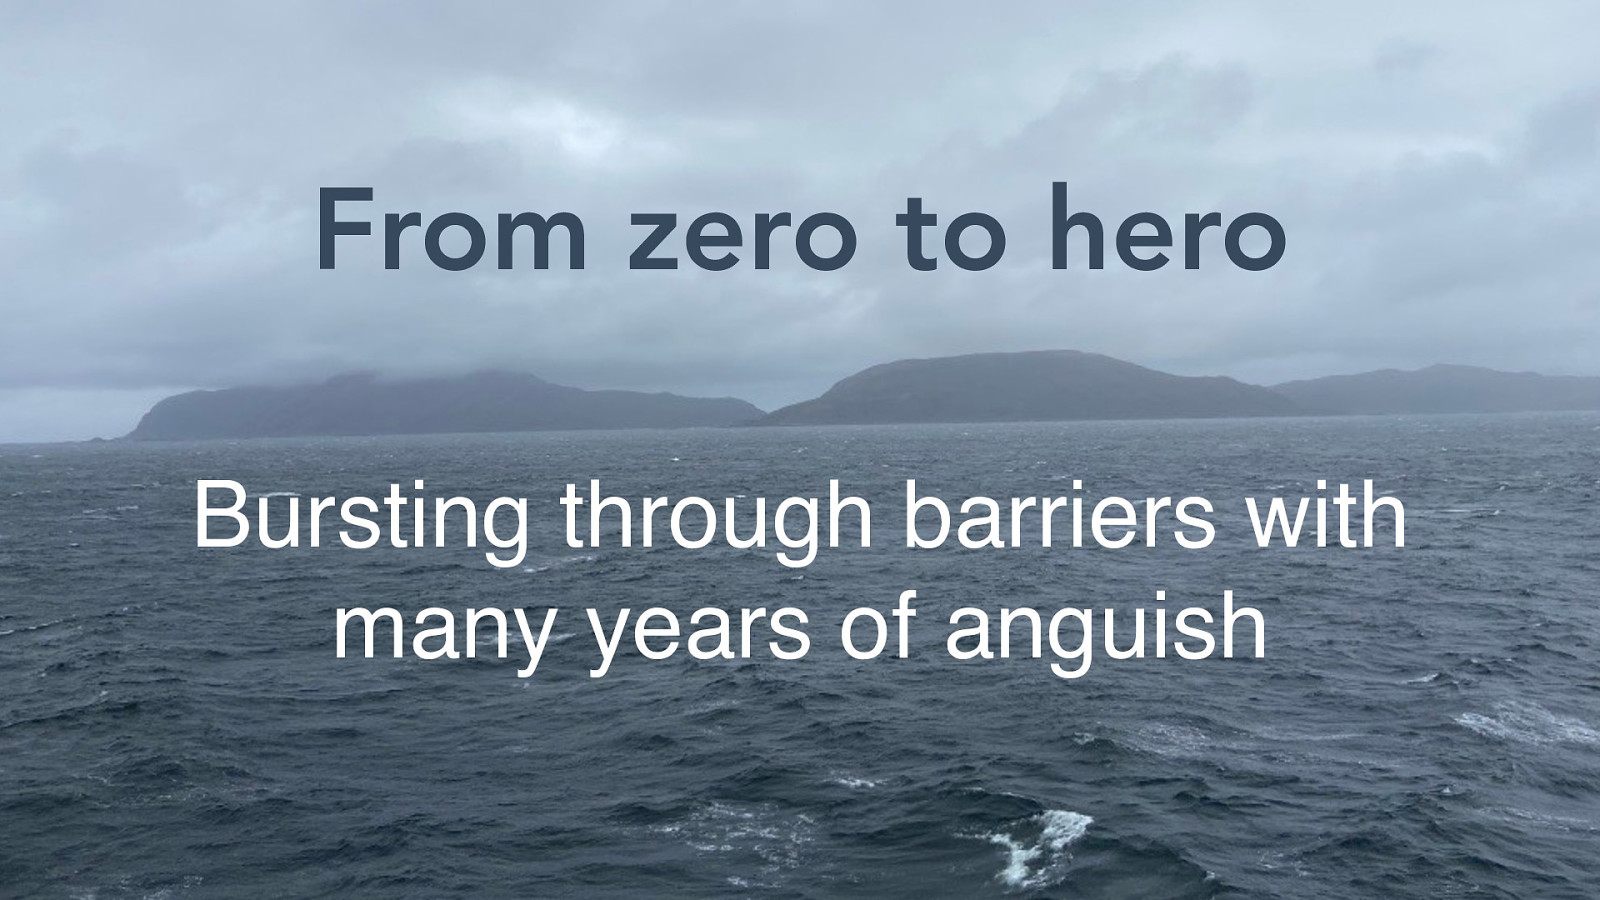 From Zero to Hero with several years of Anguish - Bursting through barriers